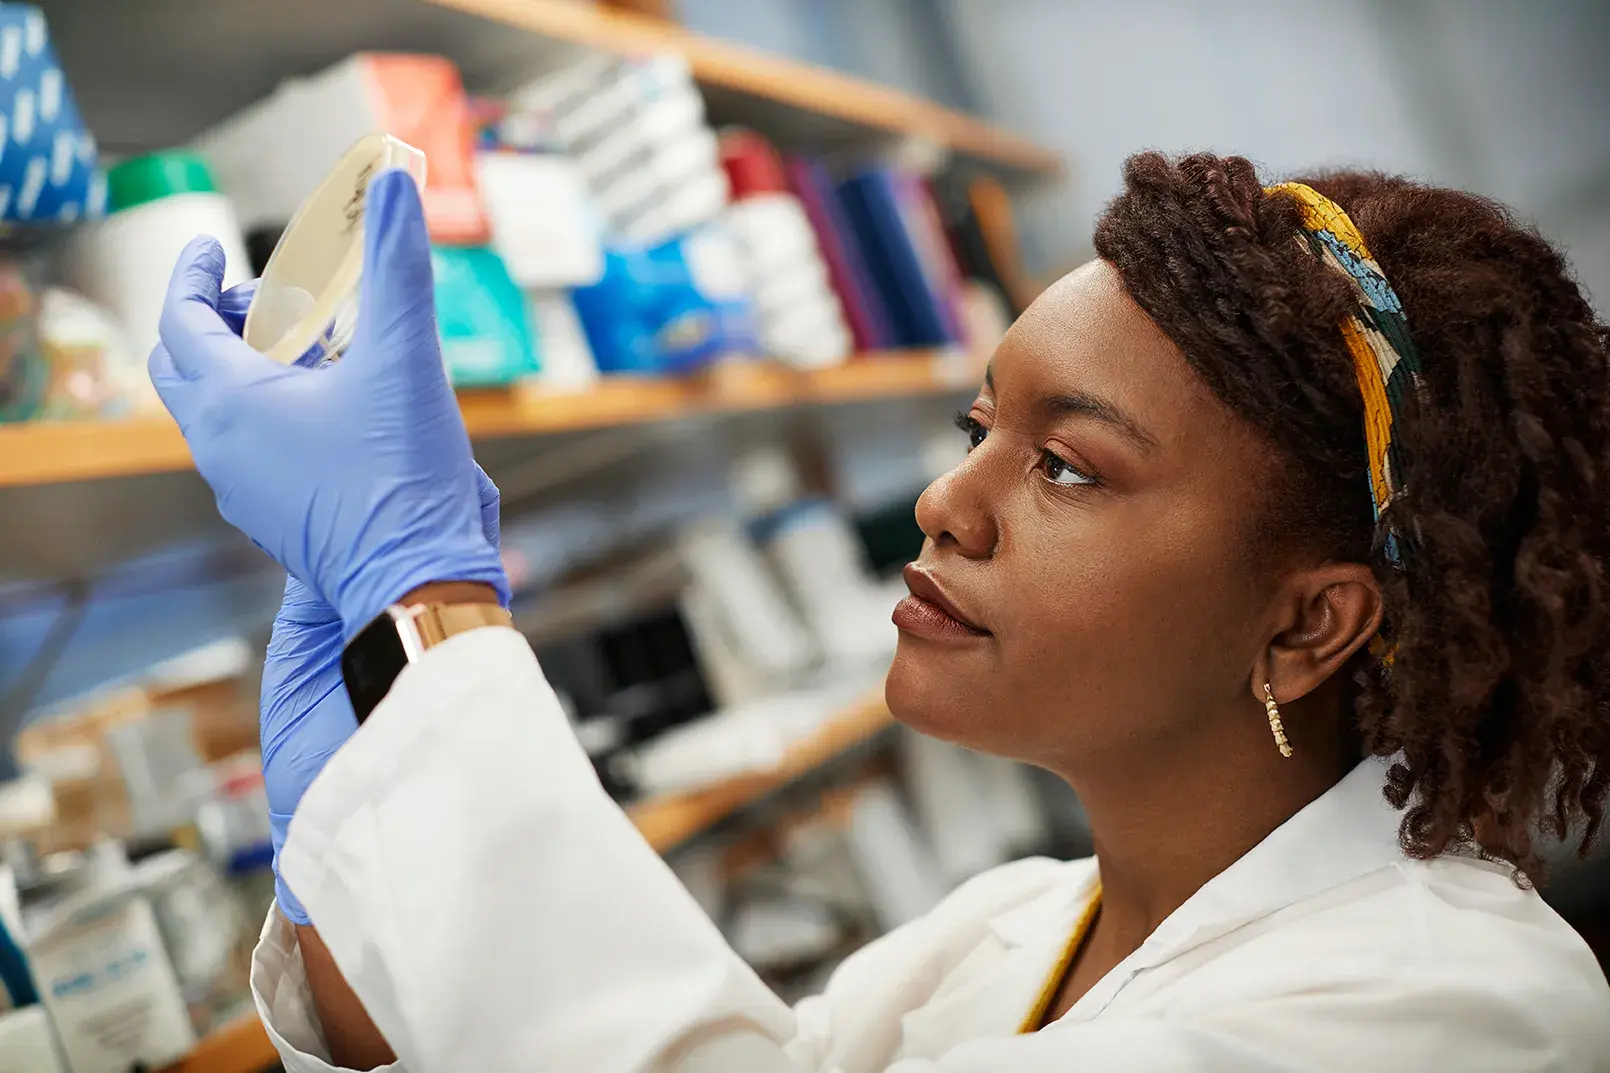 Female medical student in lab coat and gloves studying a sample